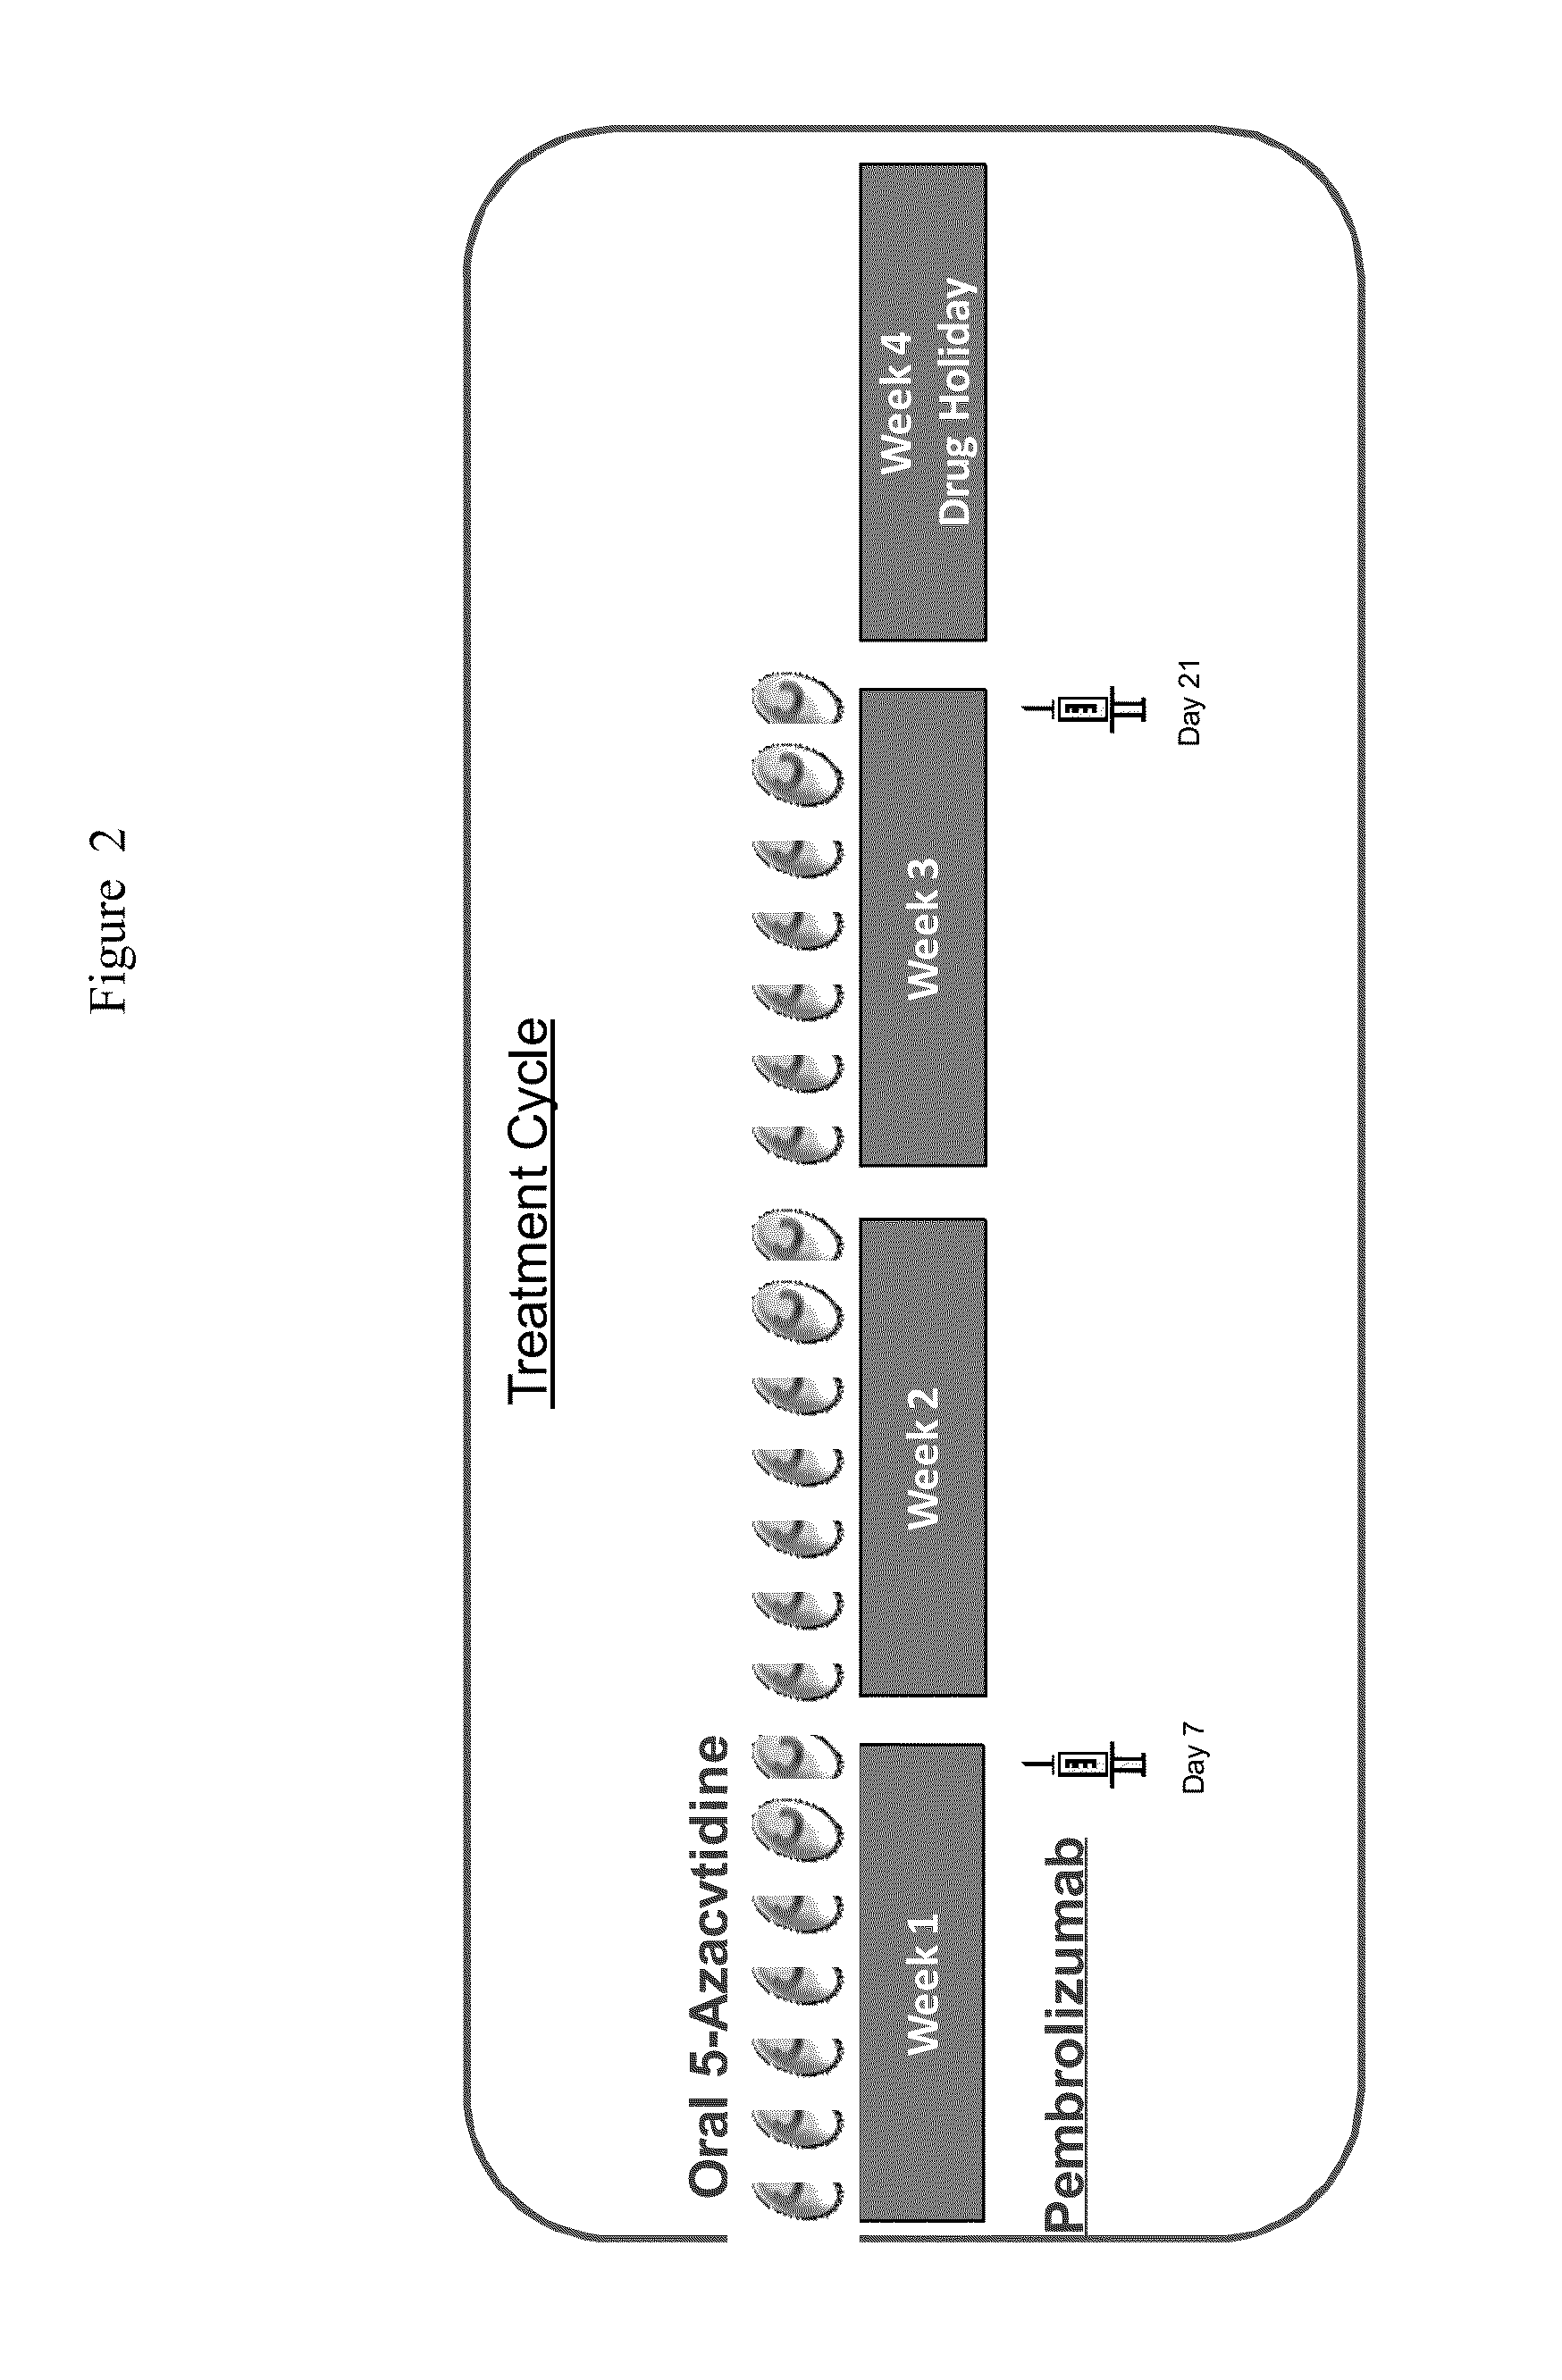 Methods for treating a disease or disorder using oral formulations of cytidine analogs in combination with an Anti-pd1 or Anti-pdl1 monoclonal antibody